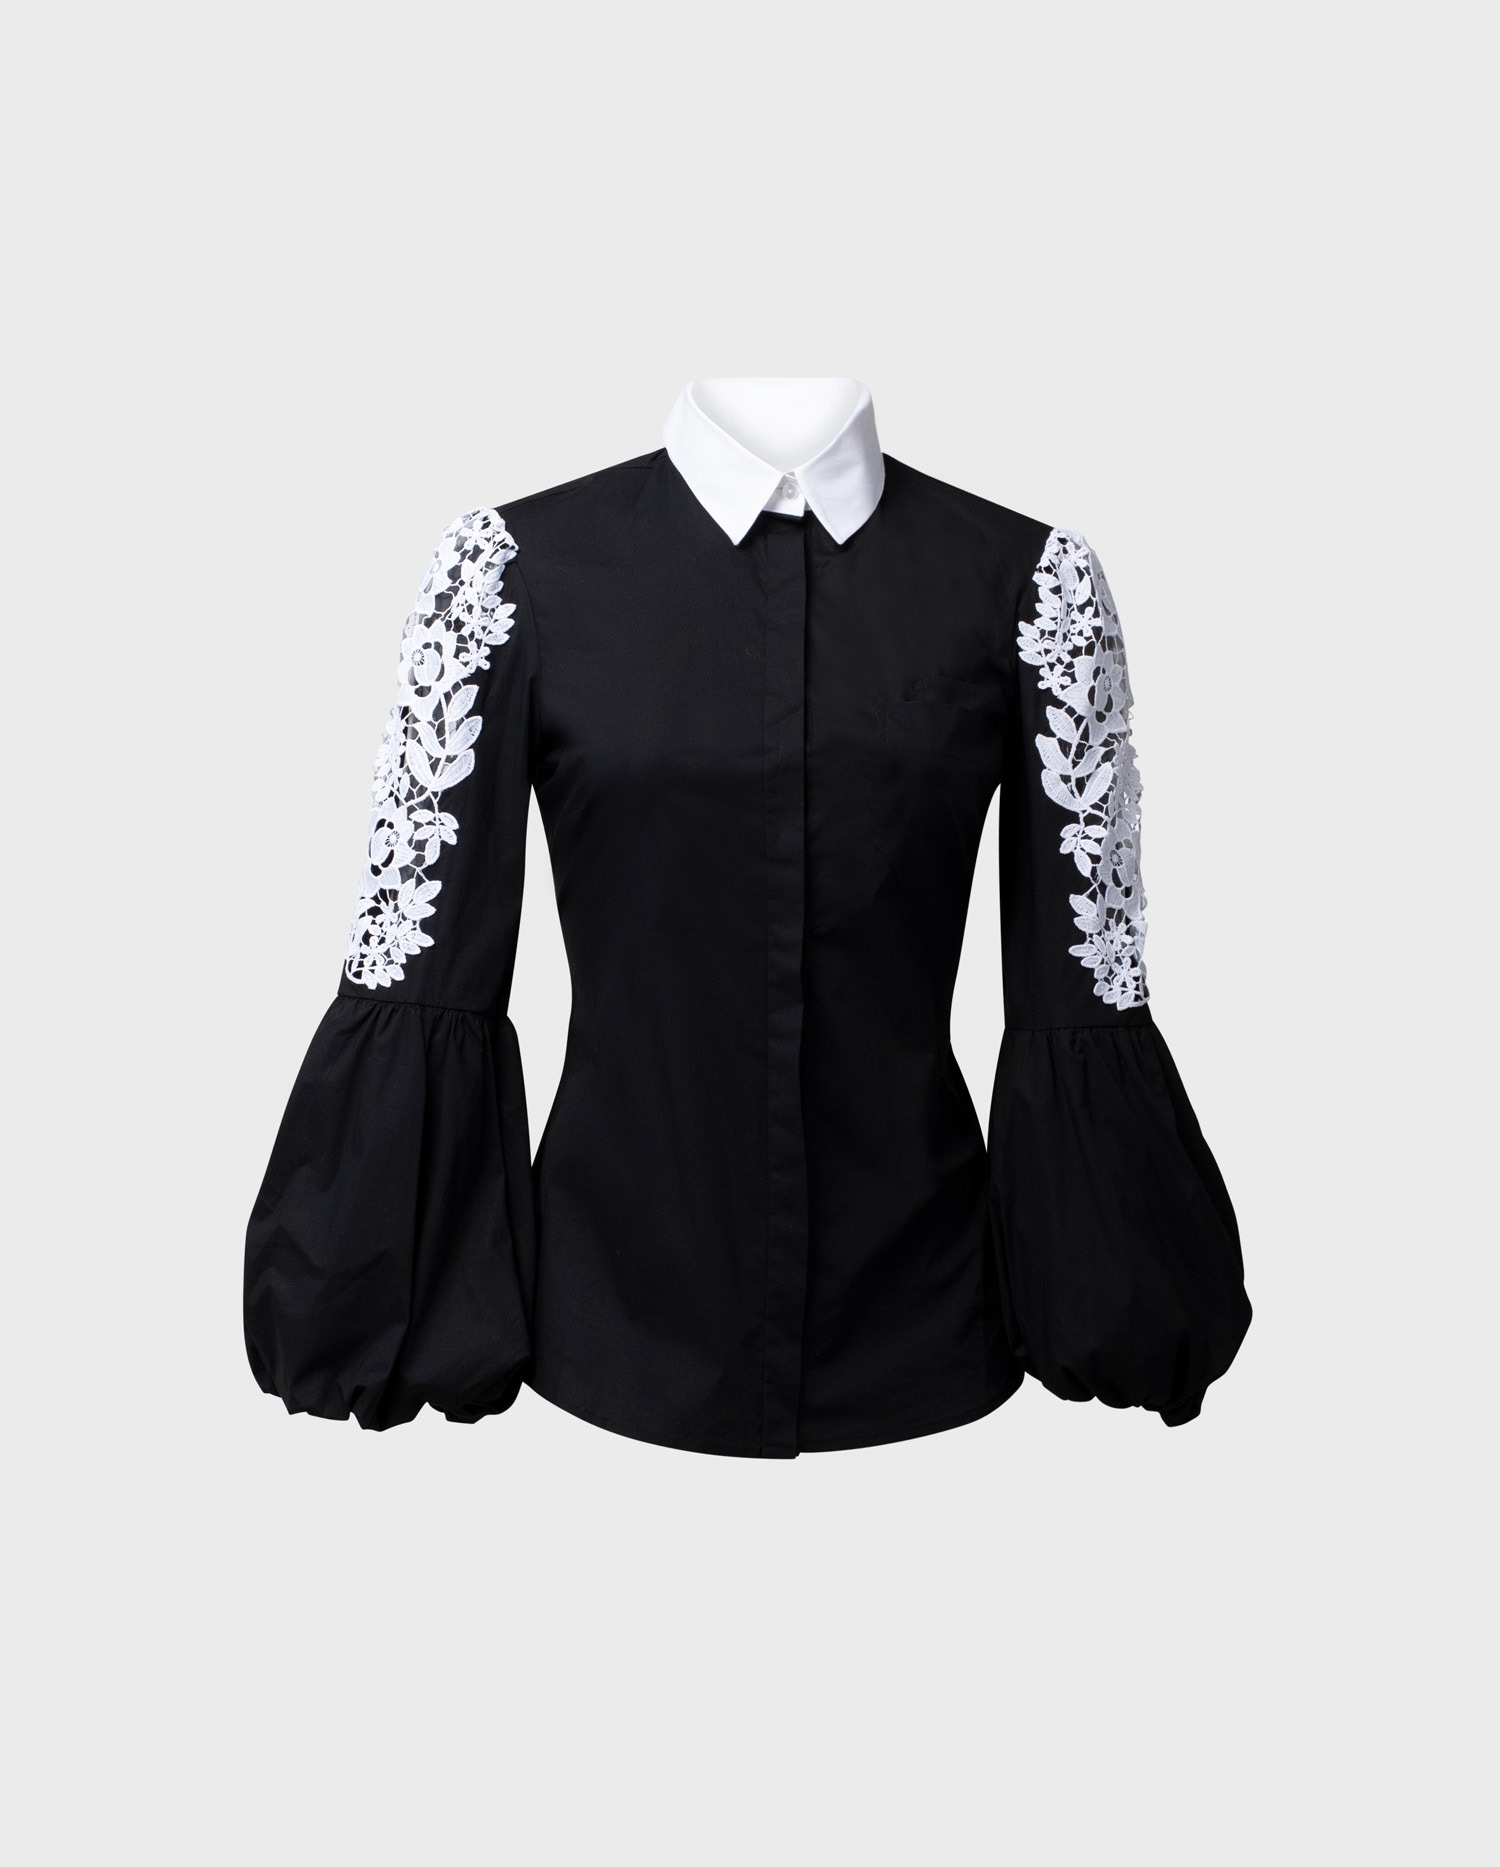 Shop the black and white LAORA shirt from designer ANNE FONTAINE